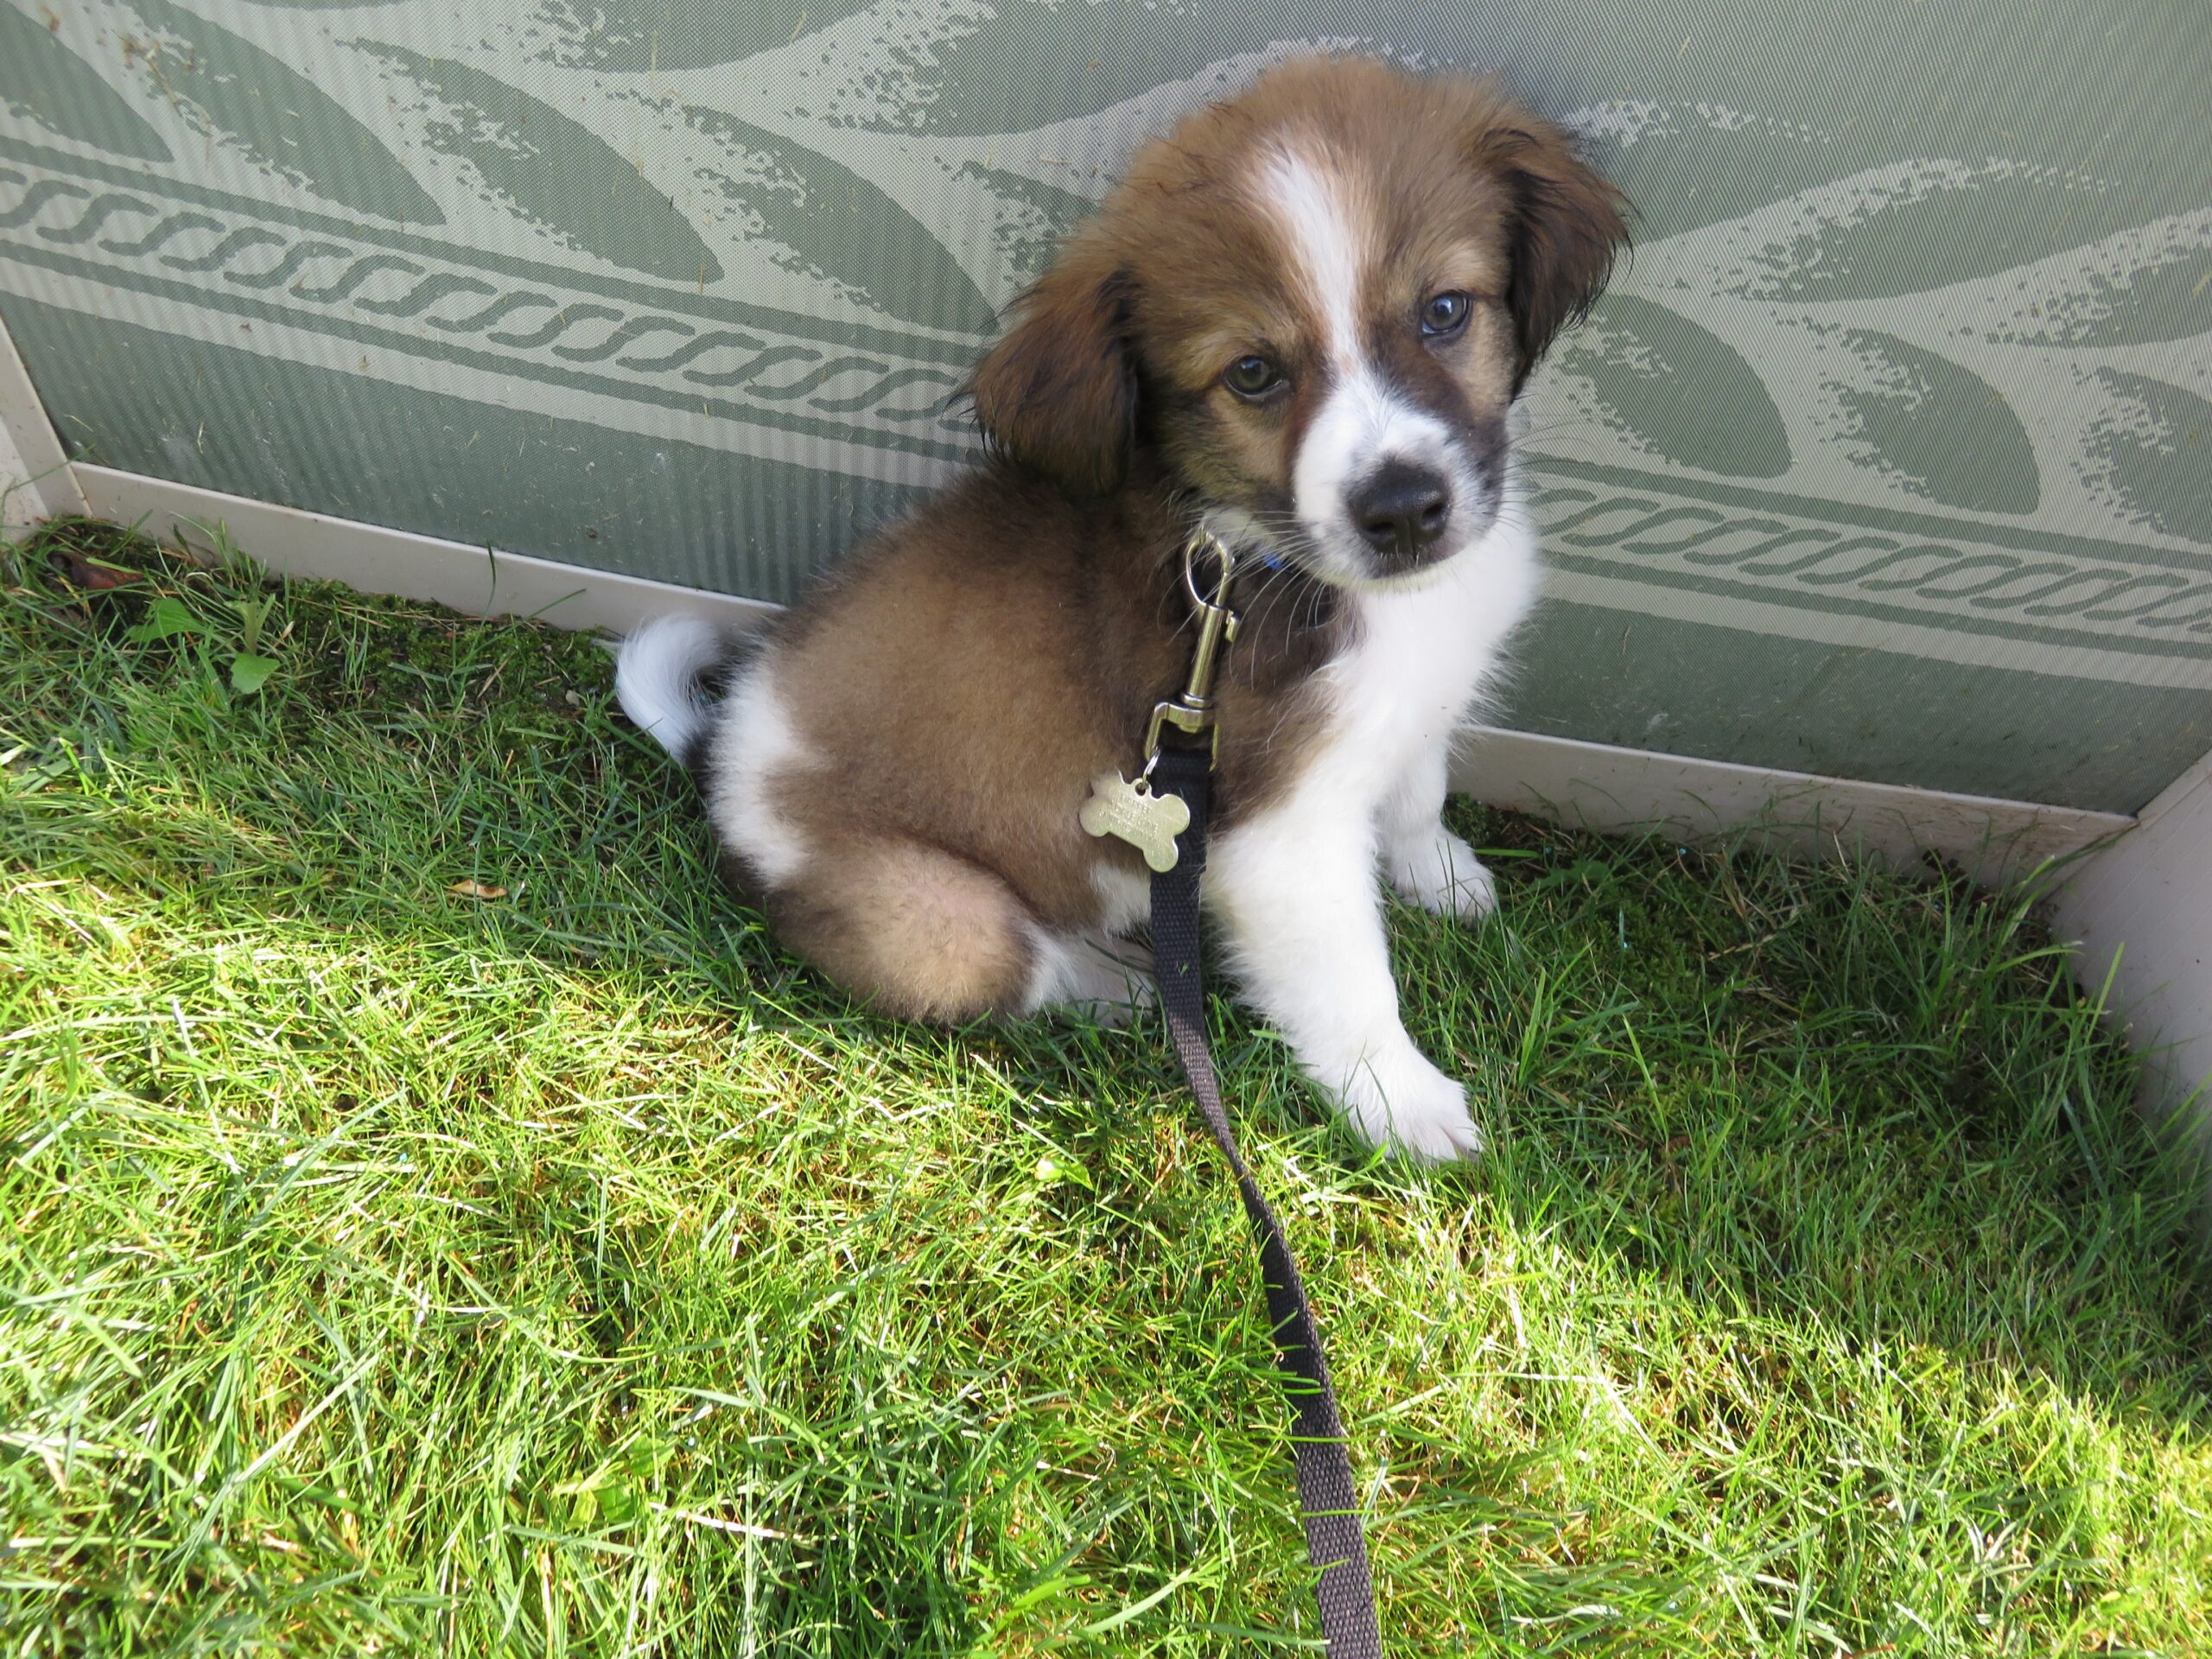 An adorable brown and white puppy sits in some grass